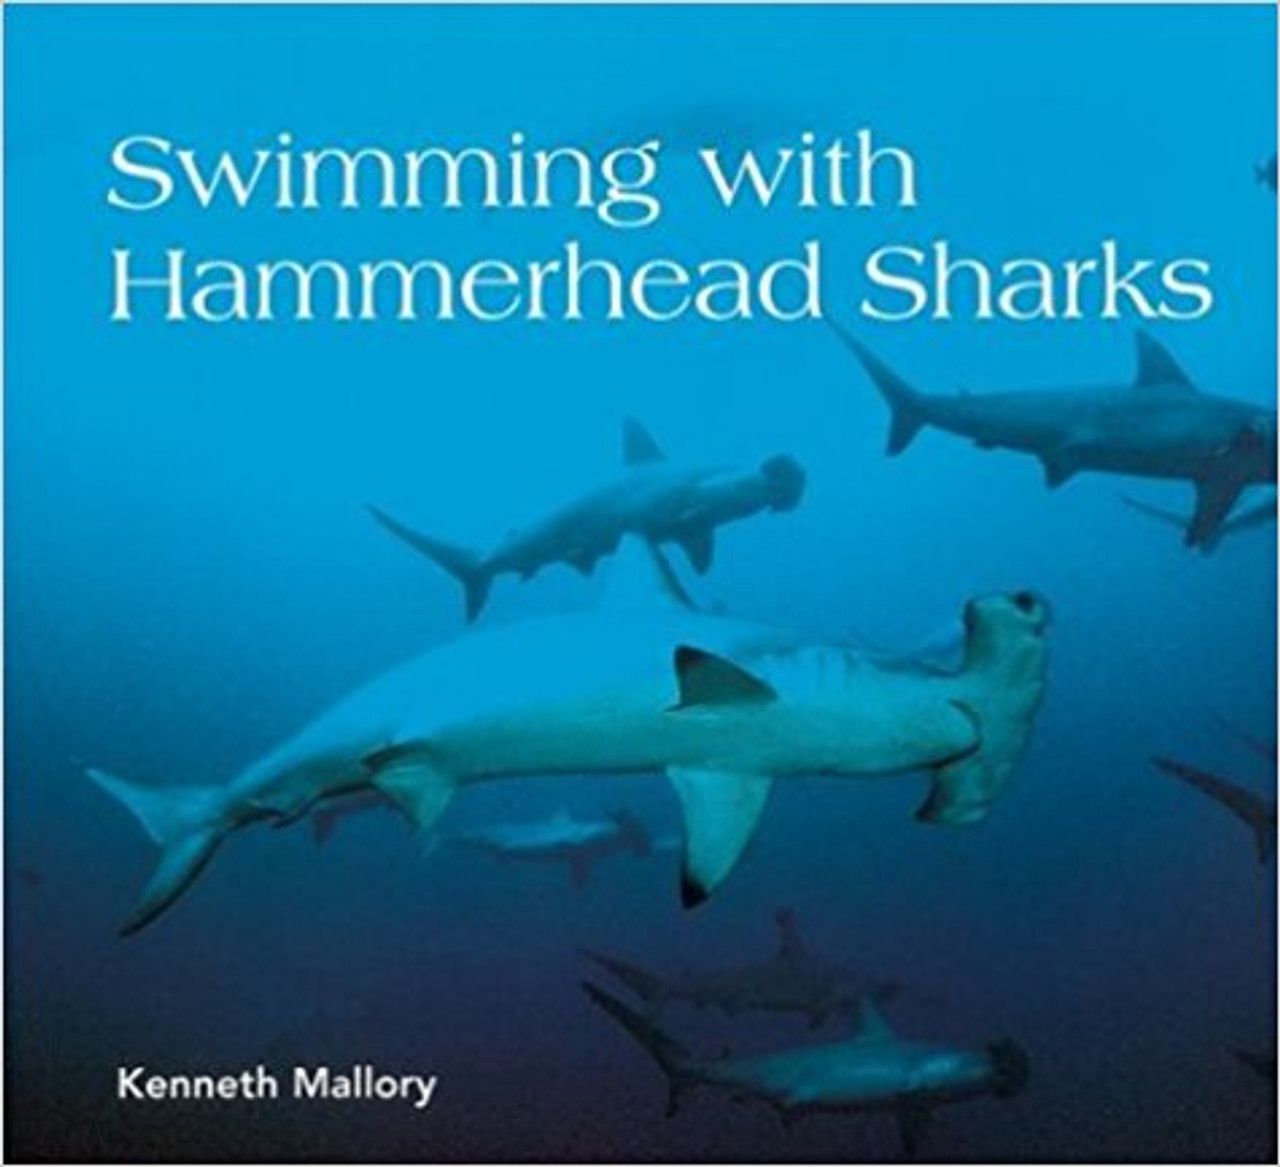 Swimming with the Hammerhead by Kenneth Mallory